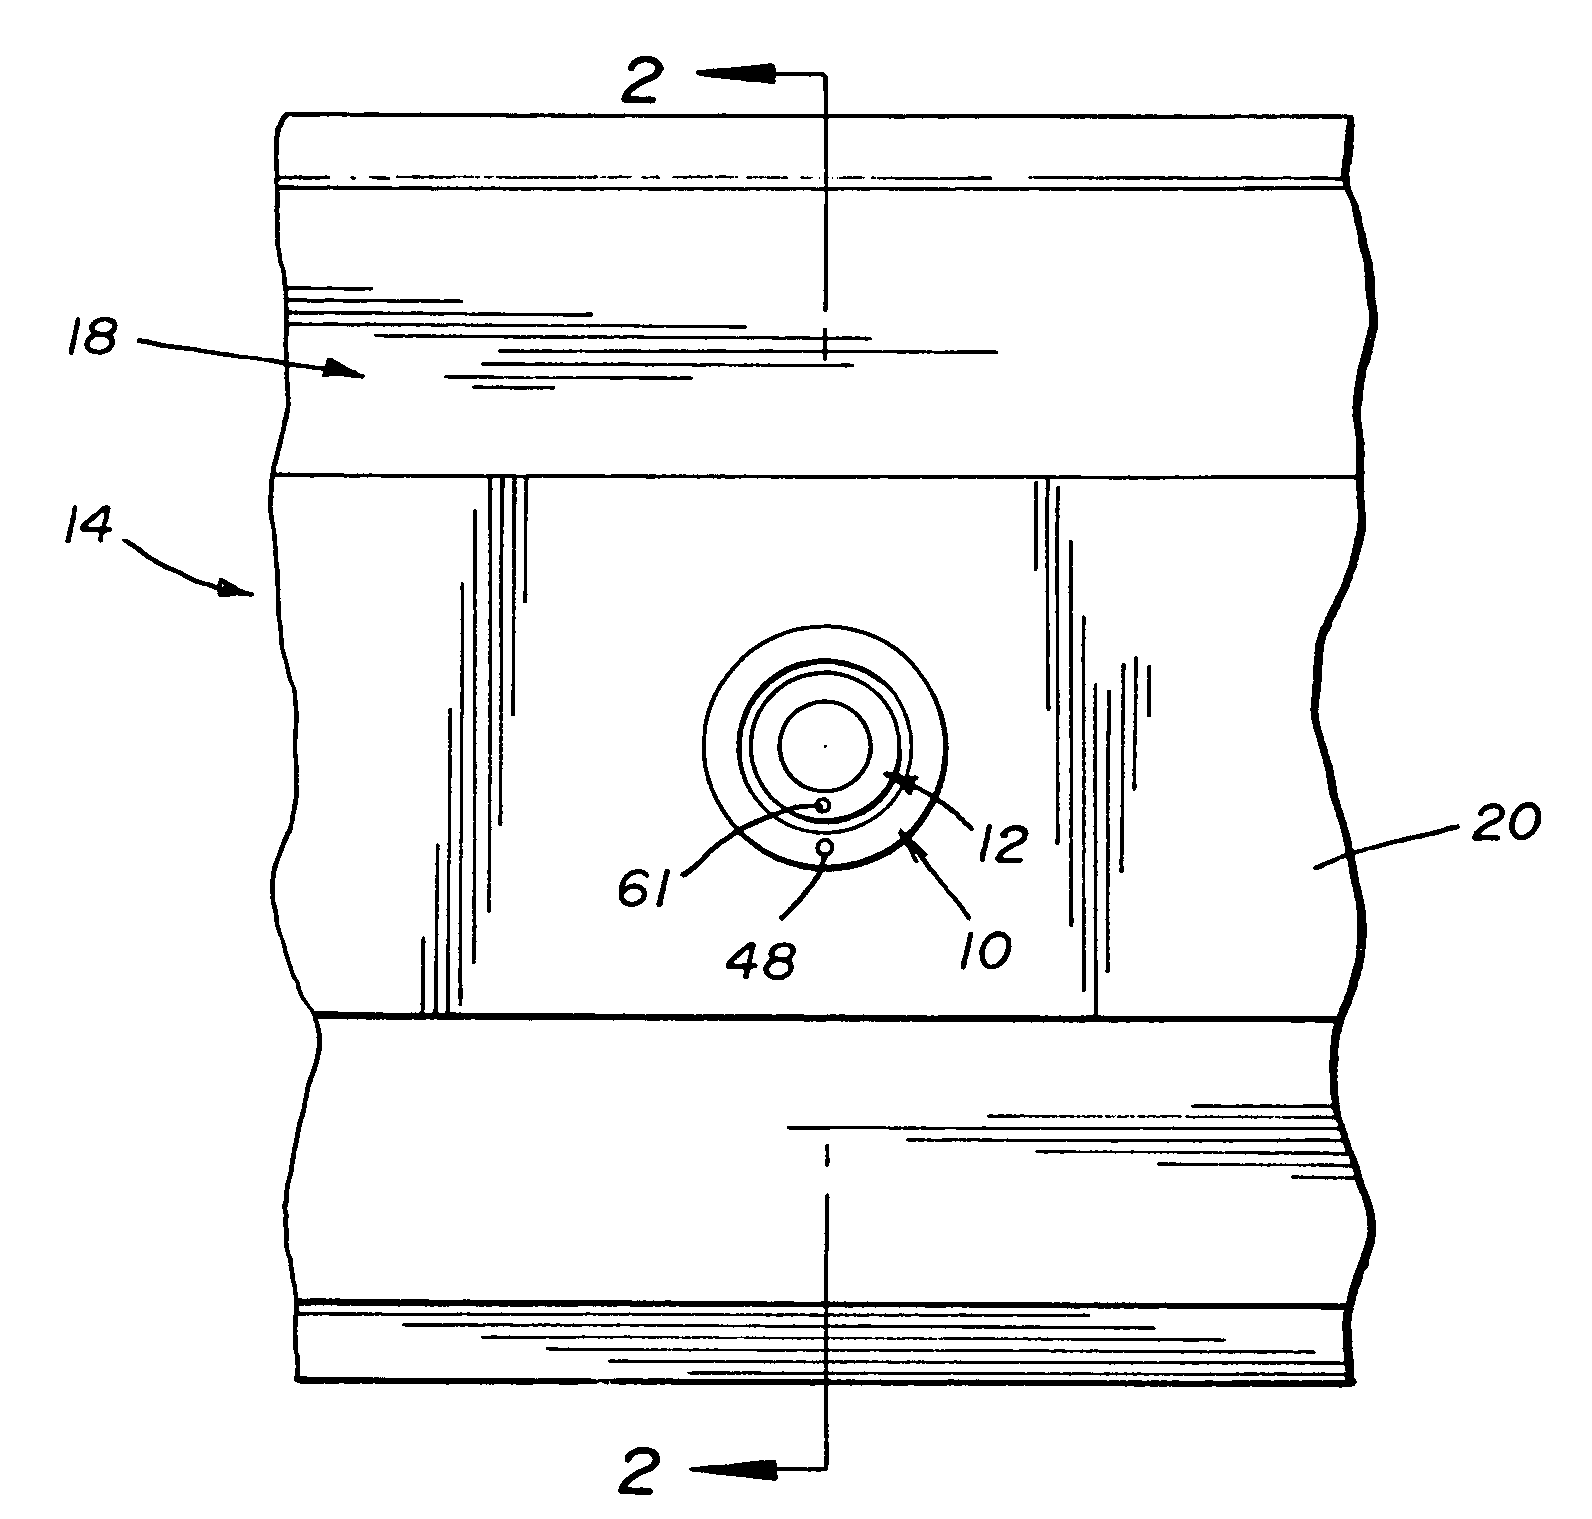 Apparatus to attach a proximity sensor to an energy absorbing vehicle bumper